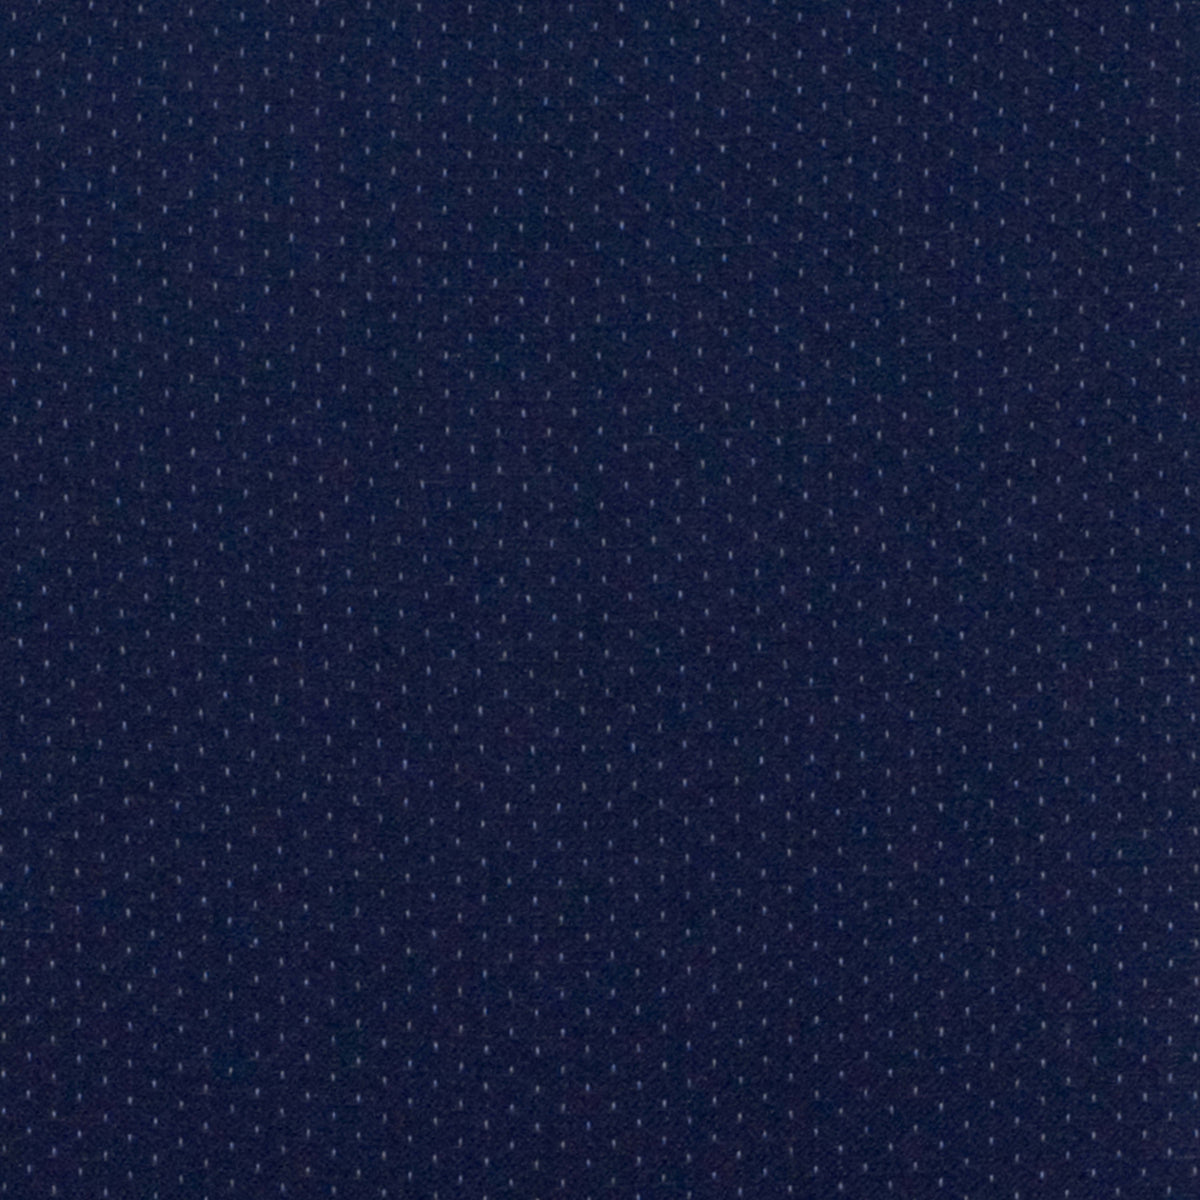 Navy Blue Patterned Fabric |#| Heavy Duty Navy Blue Dot Fabric Stack Chair - Reception Furniture